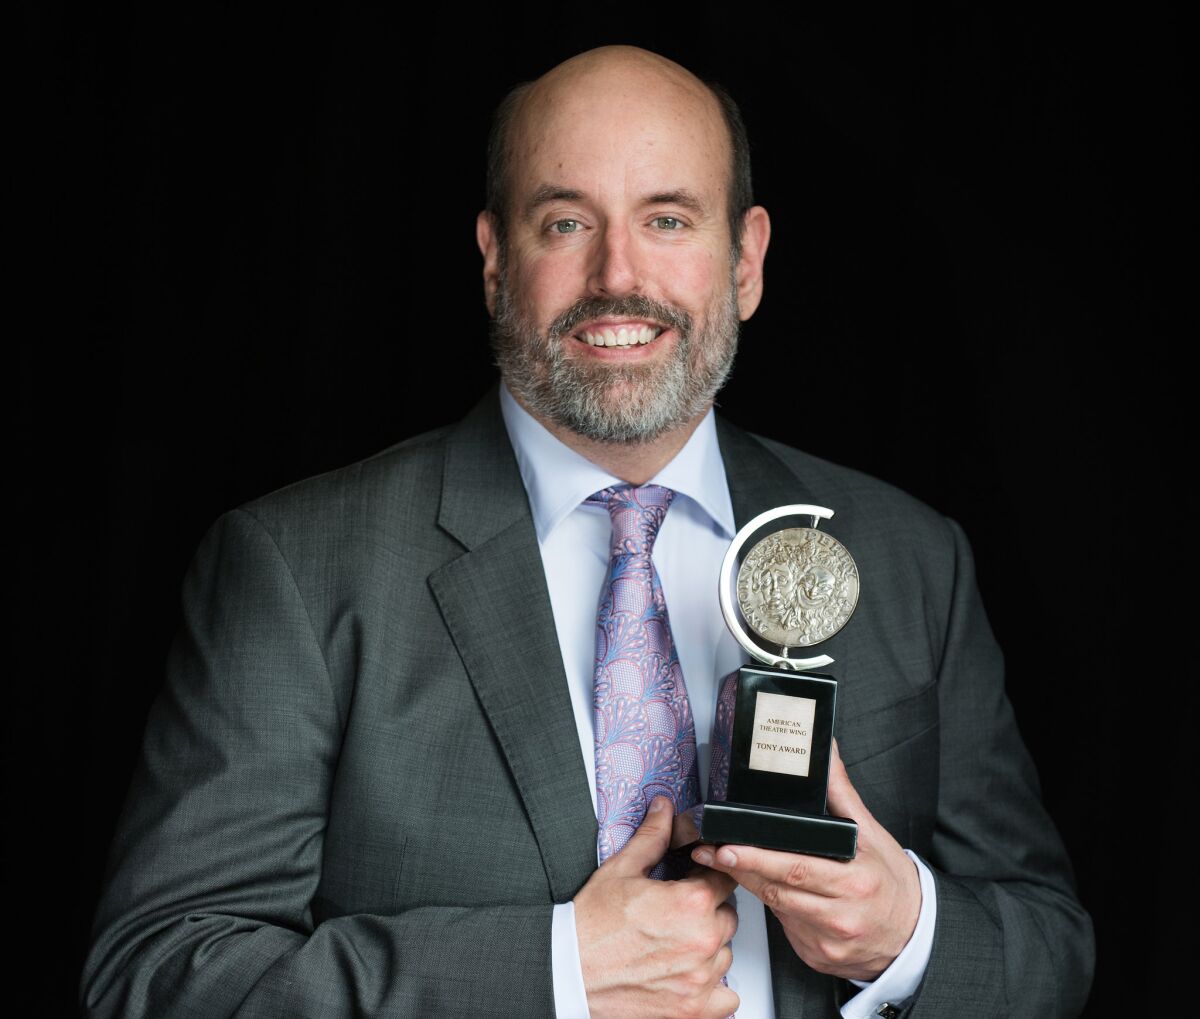 La Jolla Playhouse artistic director Christopher Ashley holding the Tony Award for directing "Come from Away."